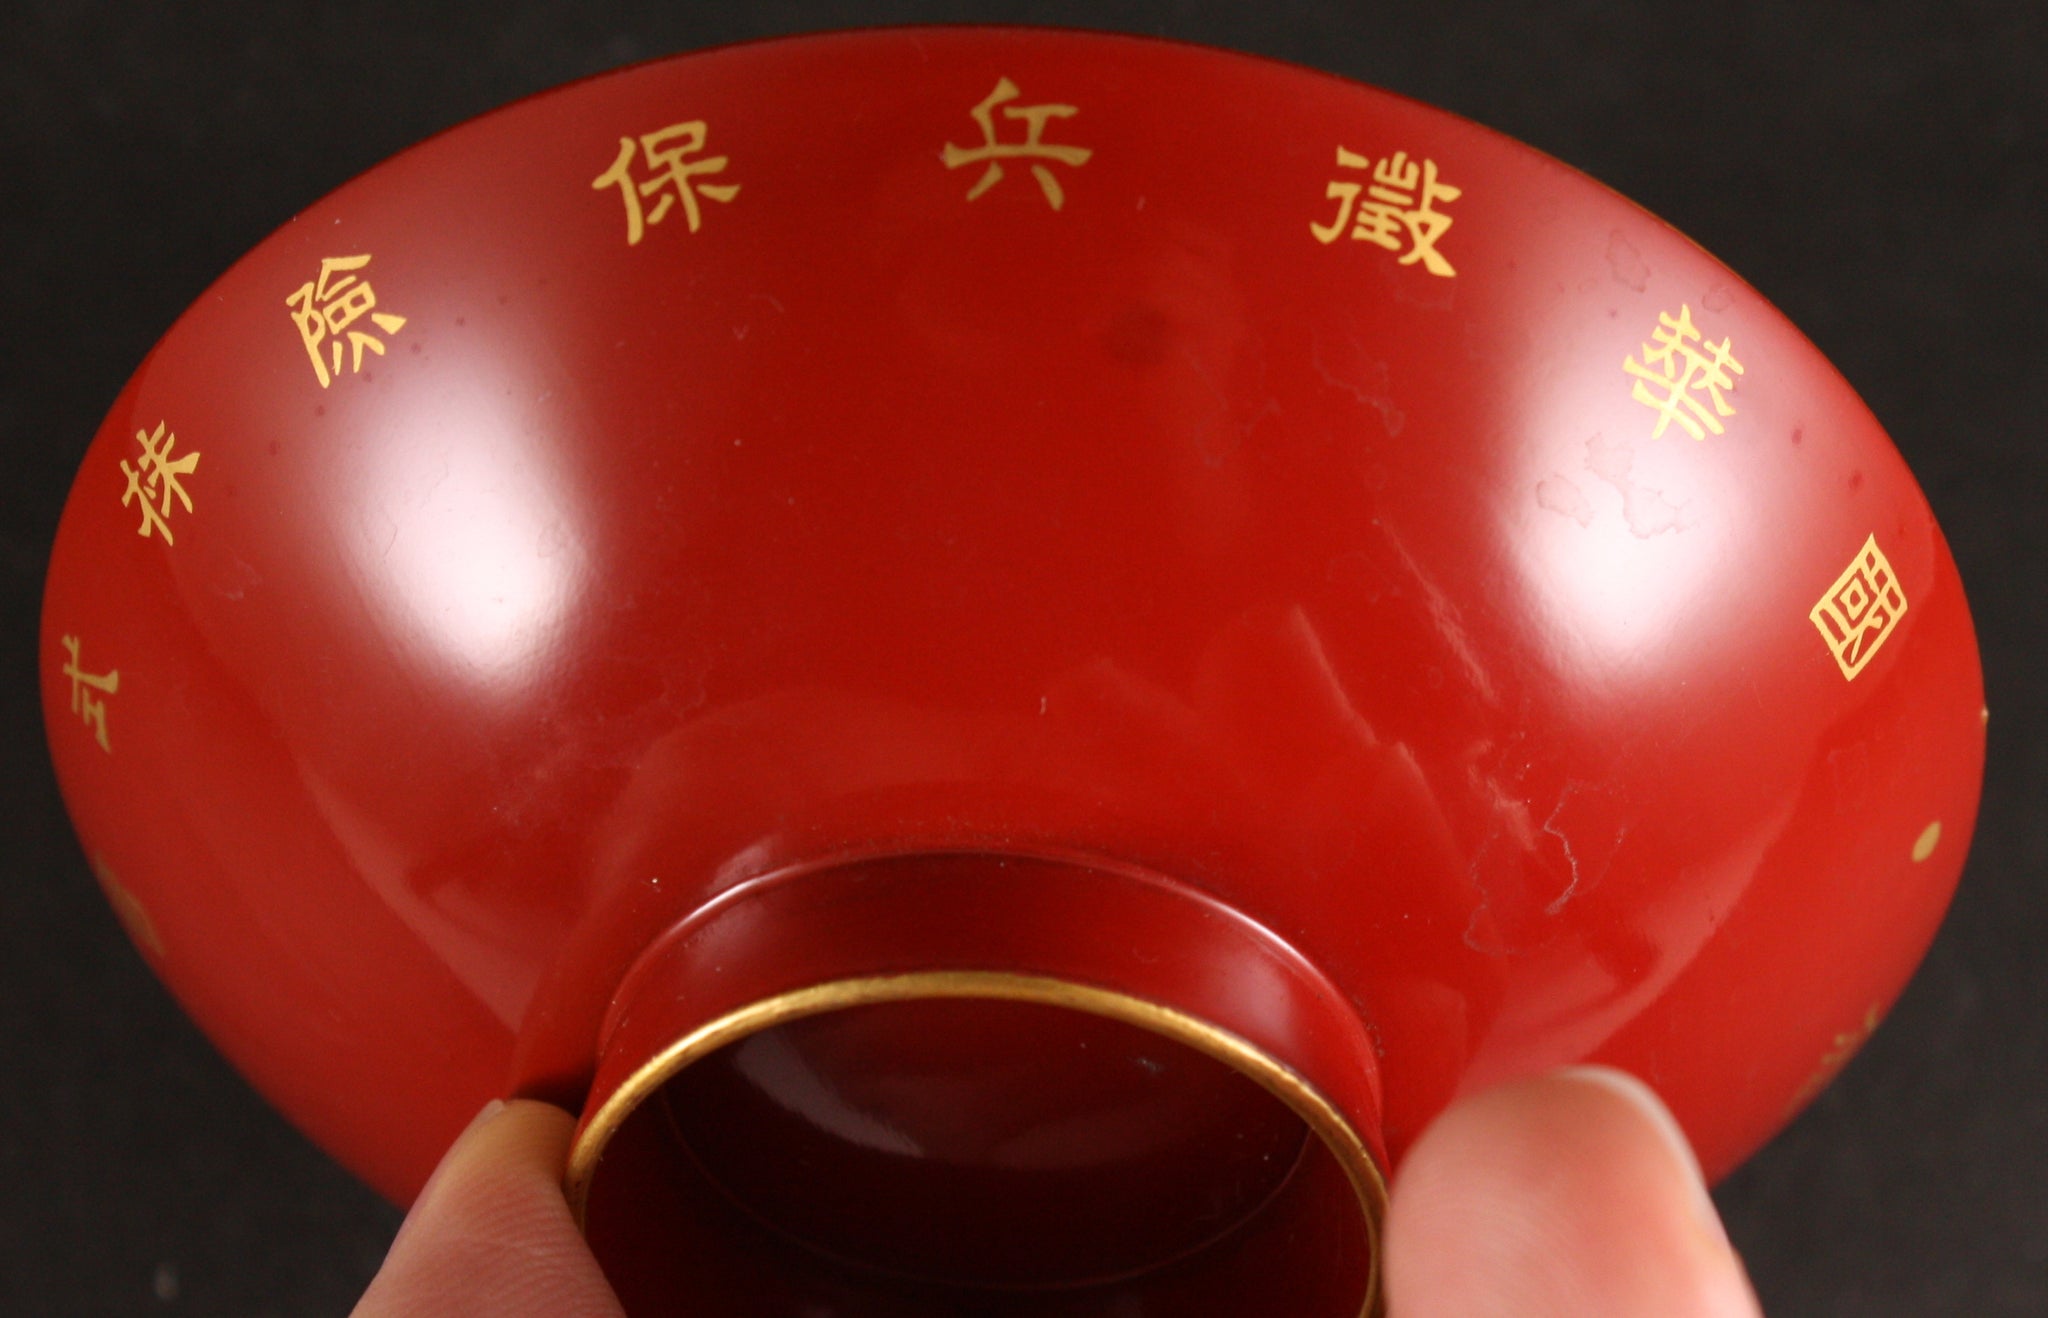 Antique Japanese Military Emperor Enthronement Soldier Insurance Company Lacquer Sake Cup